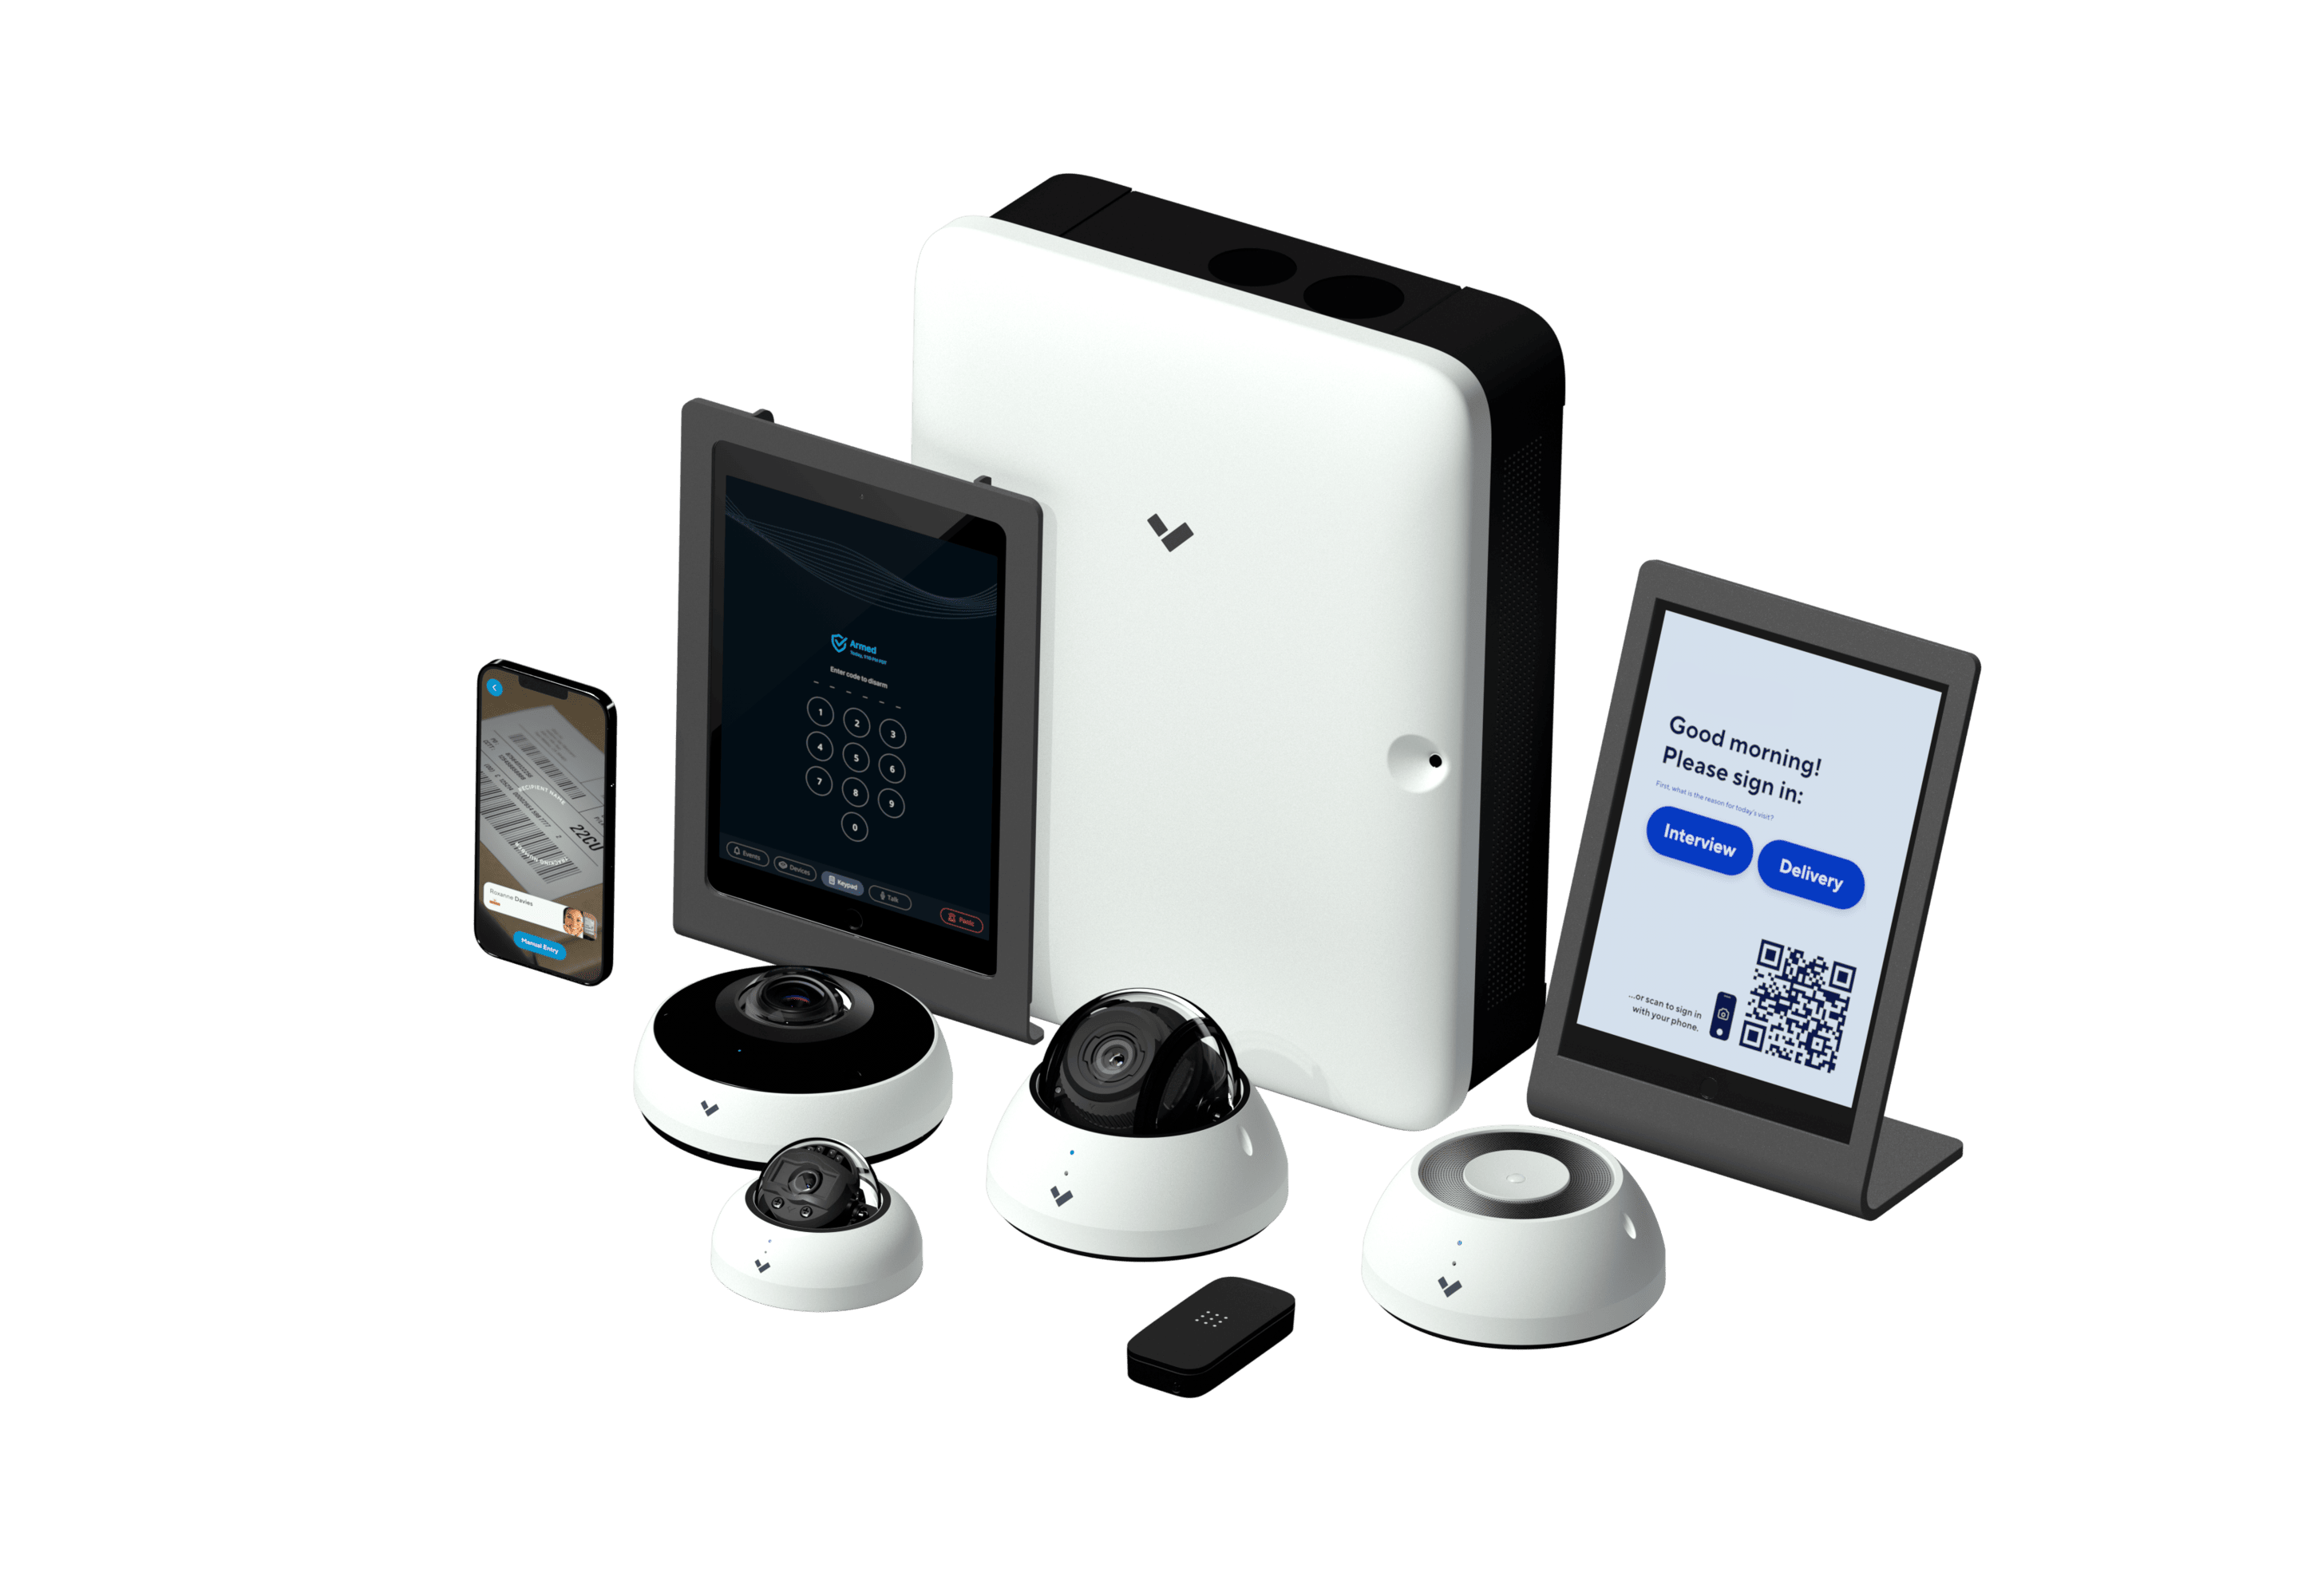 Verkada device family for security system of San Antonio businesses